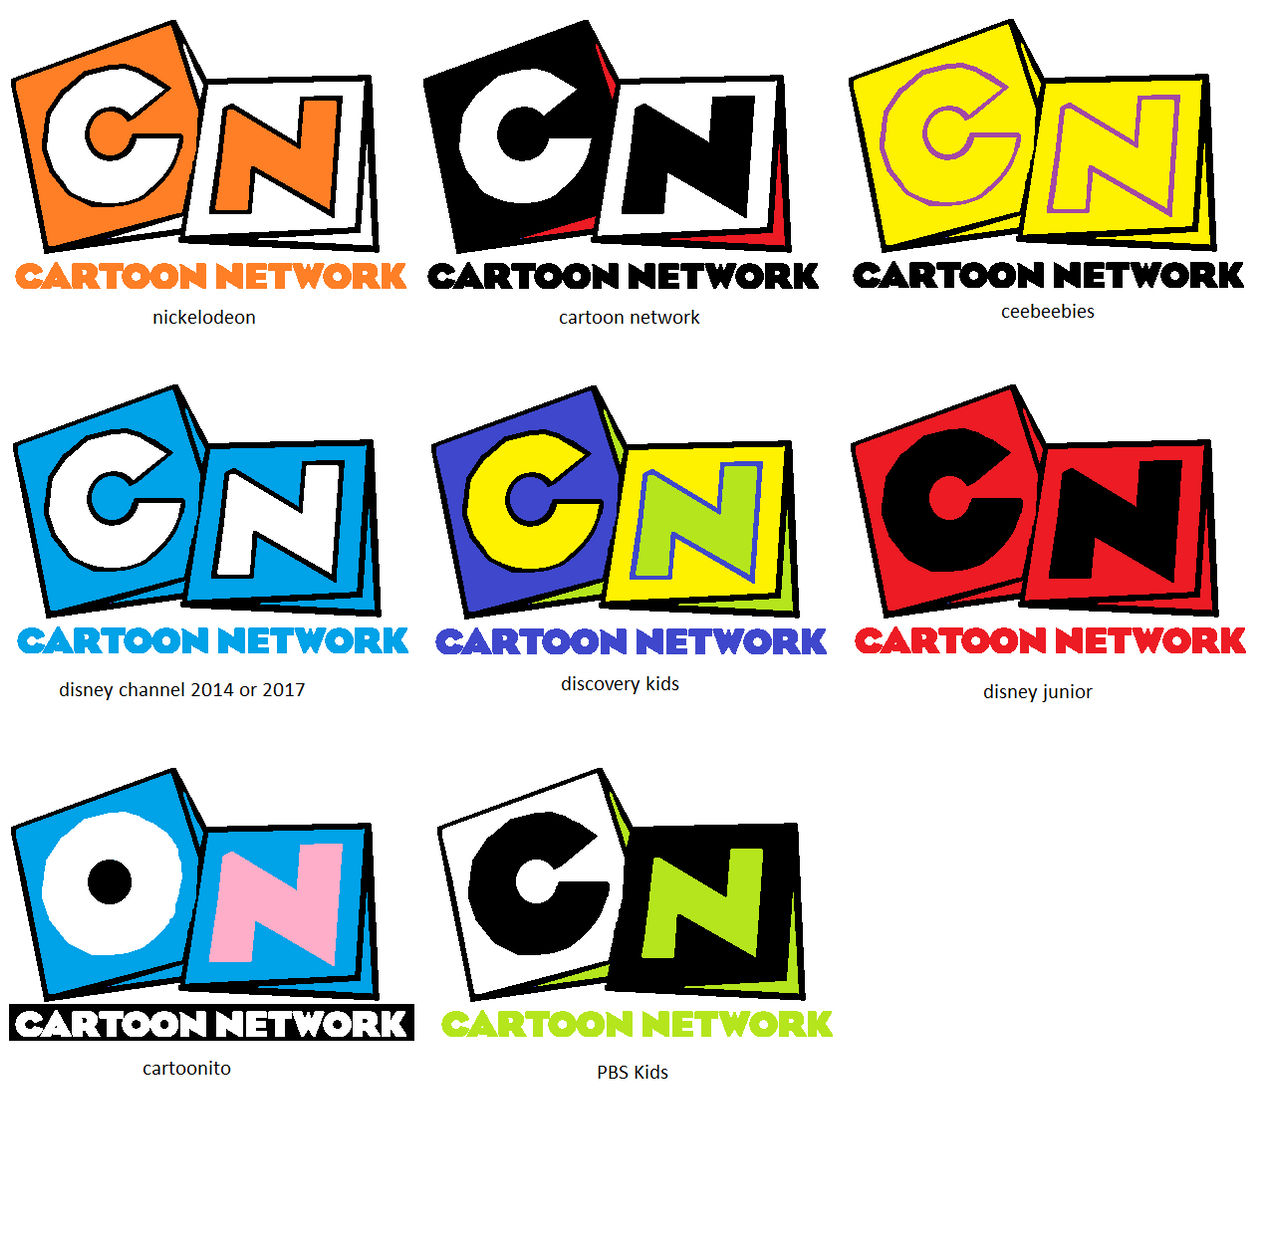 promos stylized CN Noods logos by Mariopro008 on DeviantArt